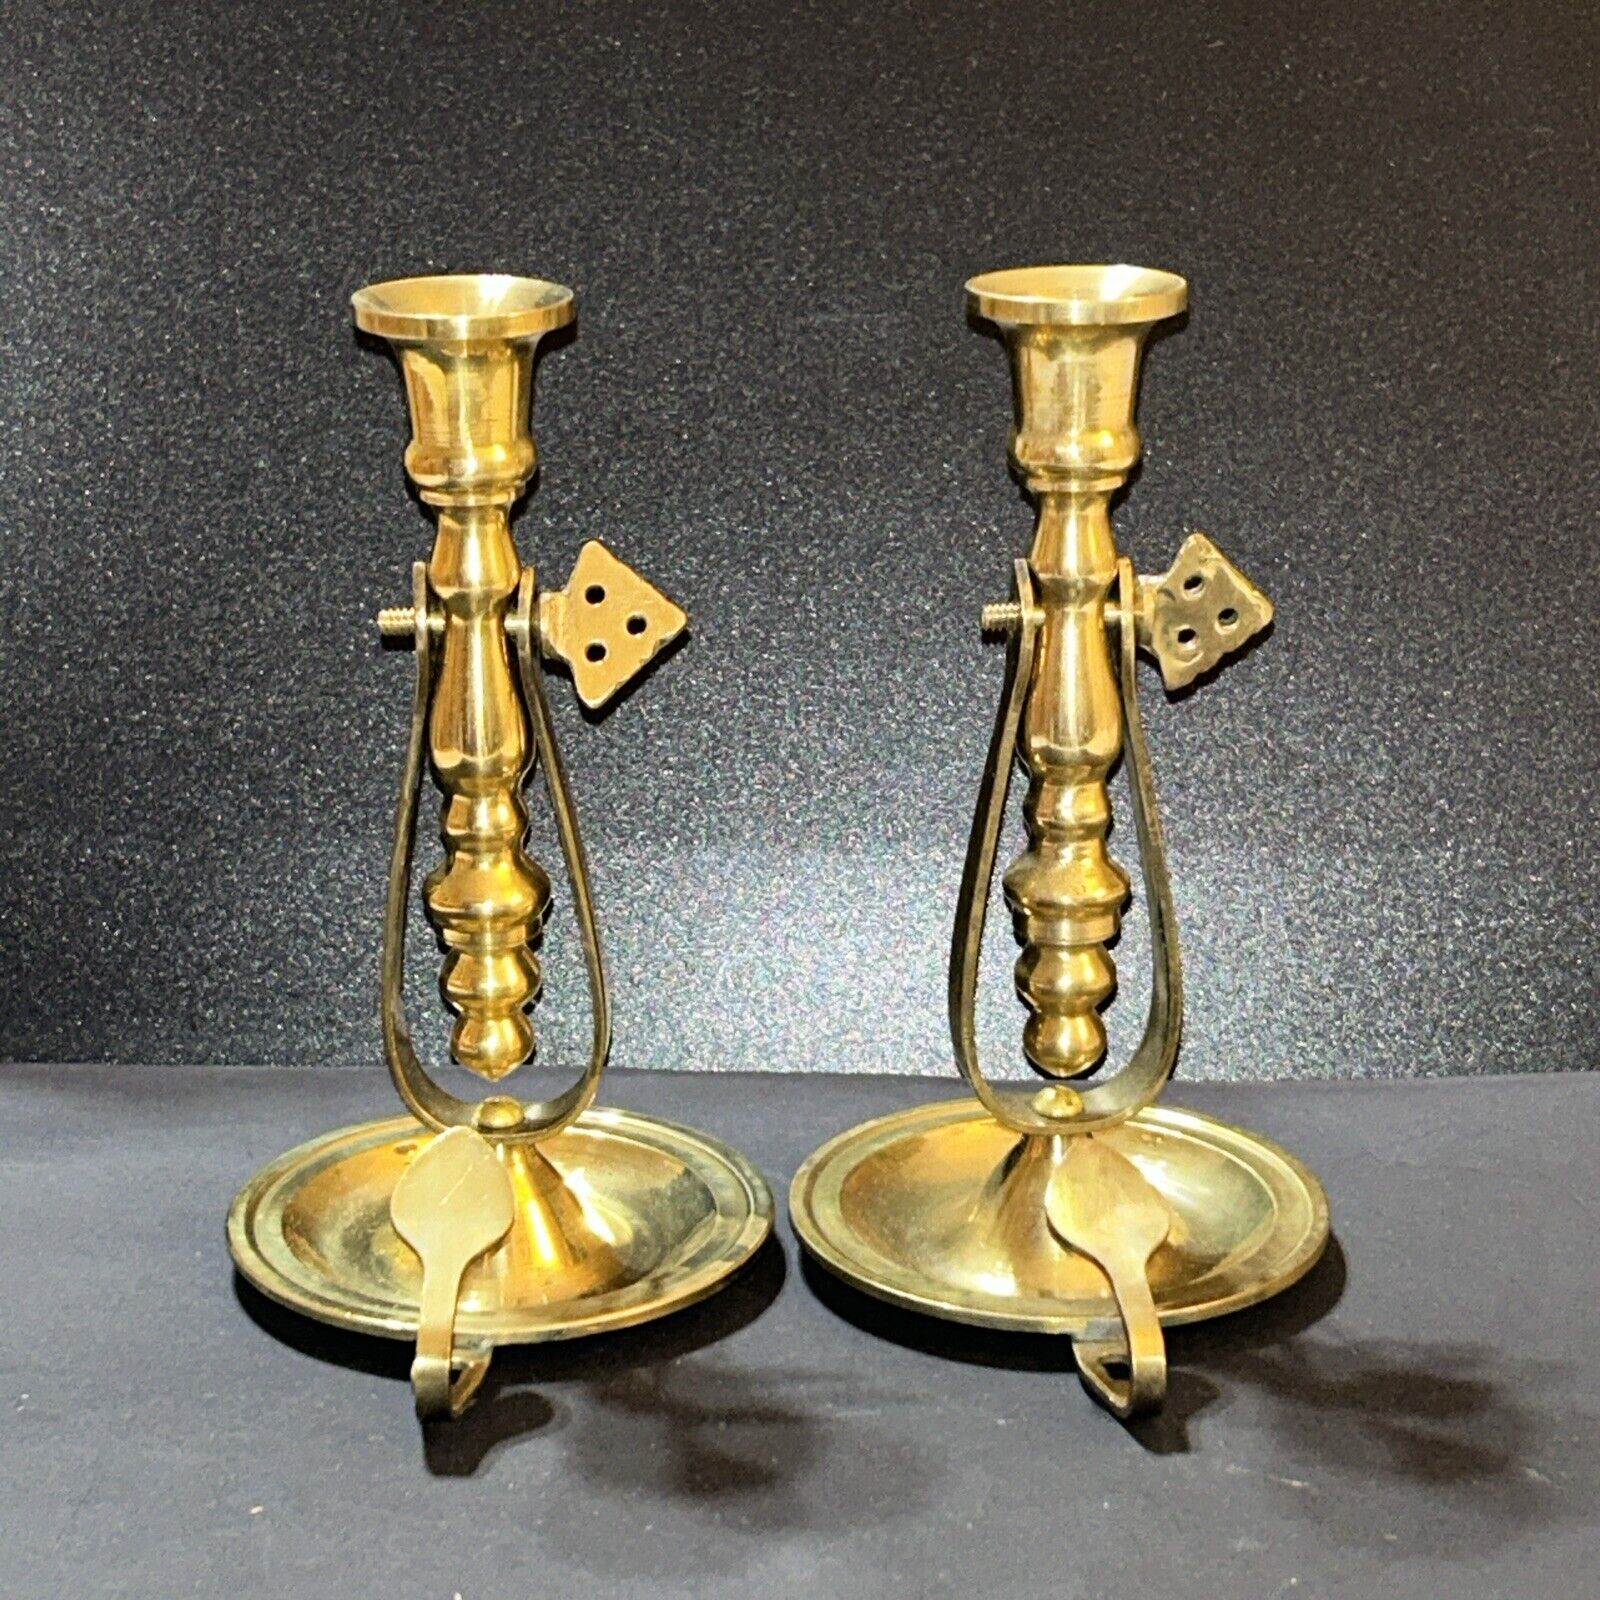 6 Inch Pair Vintage Solid Brass Candlestick Holder carry.